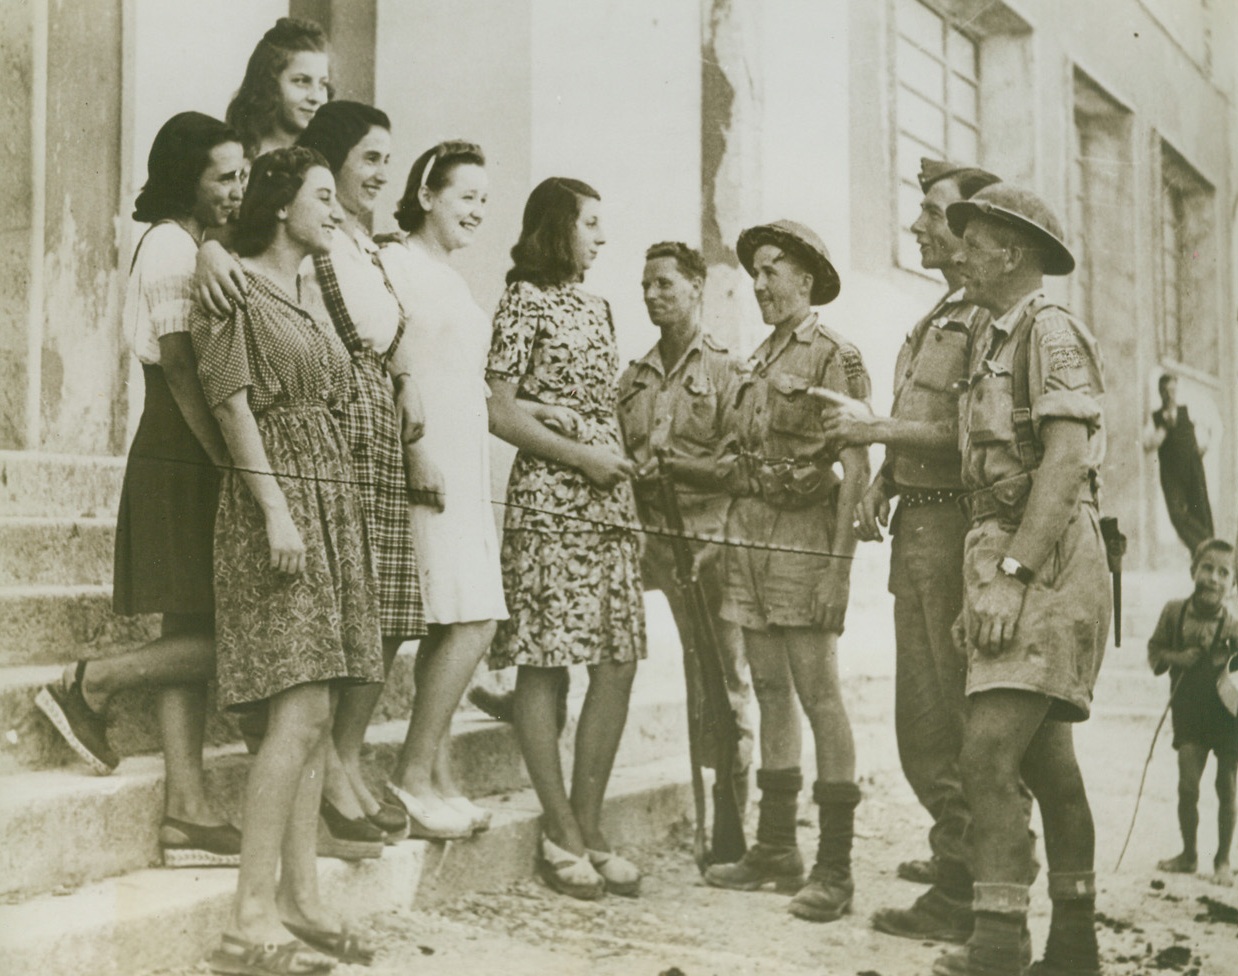 CANADIANS MEET SENORINAS, 10/29/1943. ITALY—Senorinas of the Italian town of Avigliano shine up to a Canadian street patrol. Canadians, left to right, are Pte. W. B. Campbell, Rolla, B.C.; Pte. C. E. White and Cpl. J. M. Frew, both of Edmonton. Fourth man is unidentified. Credit: Acme;